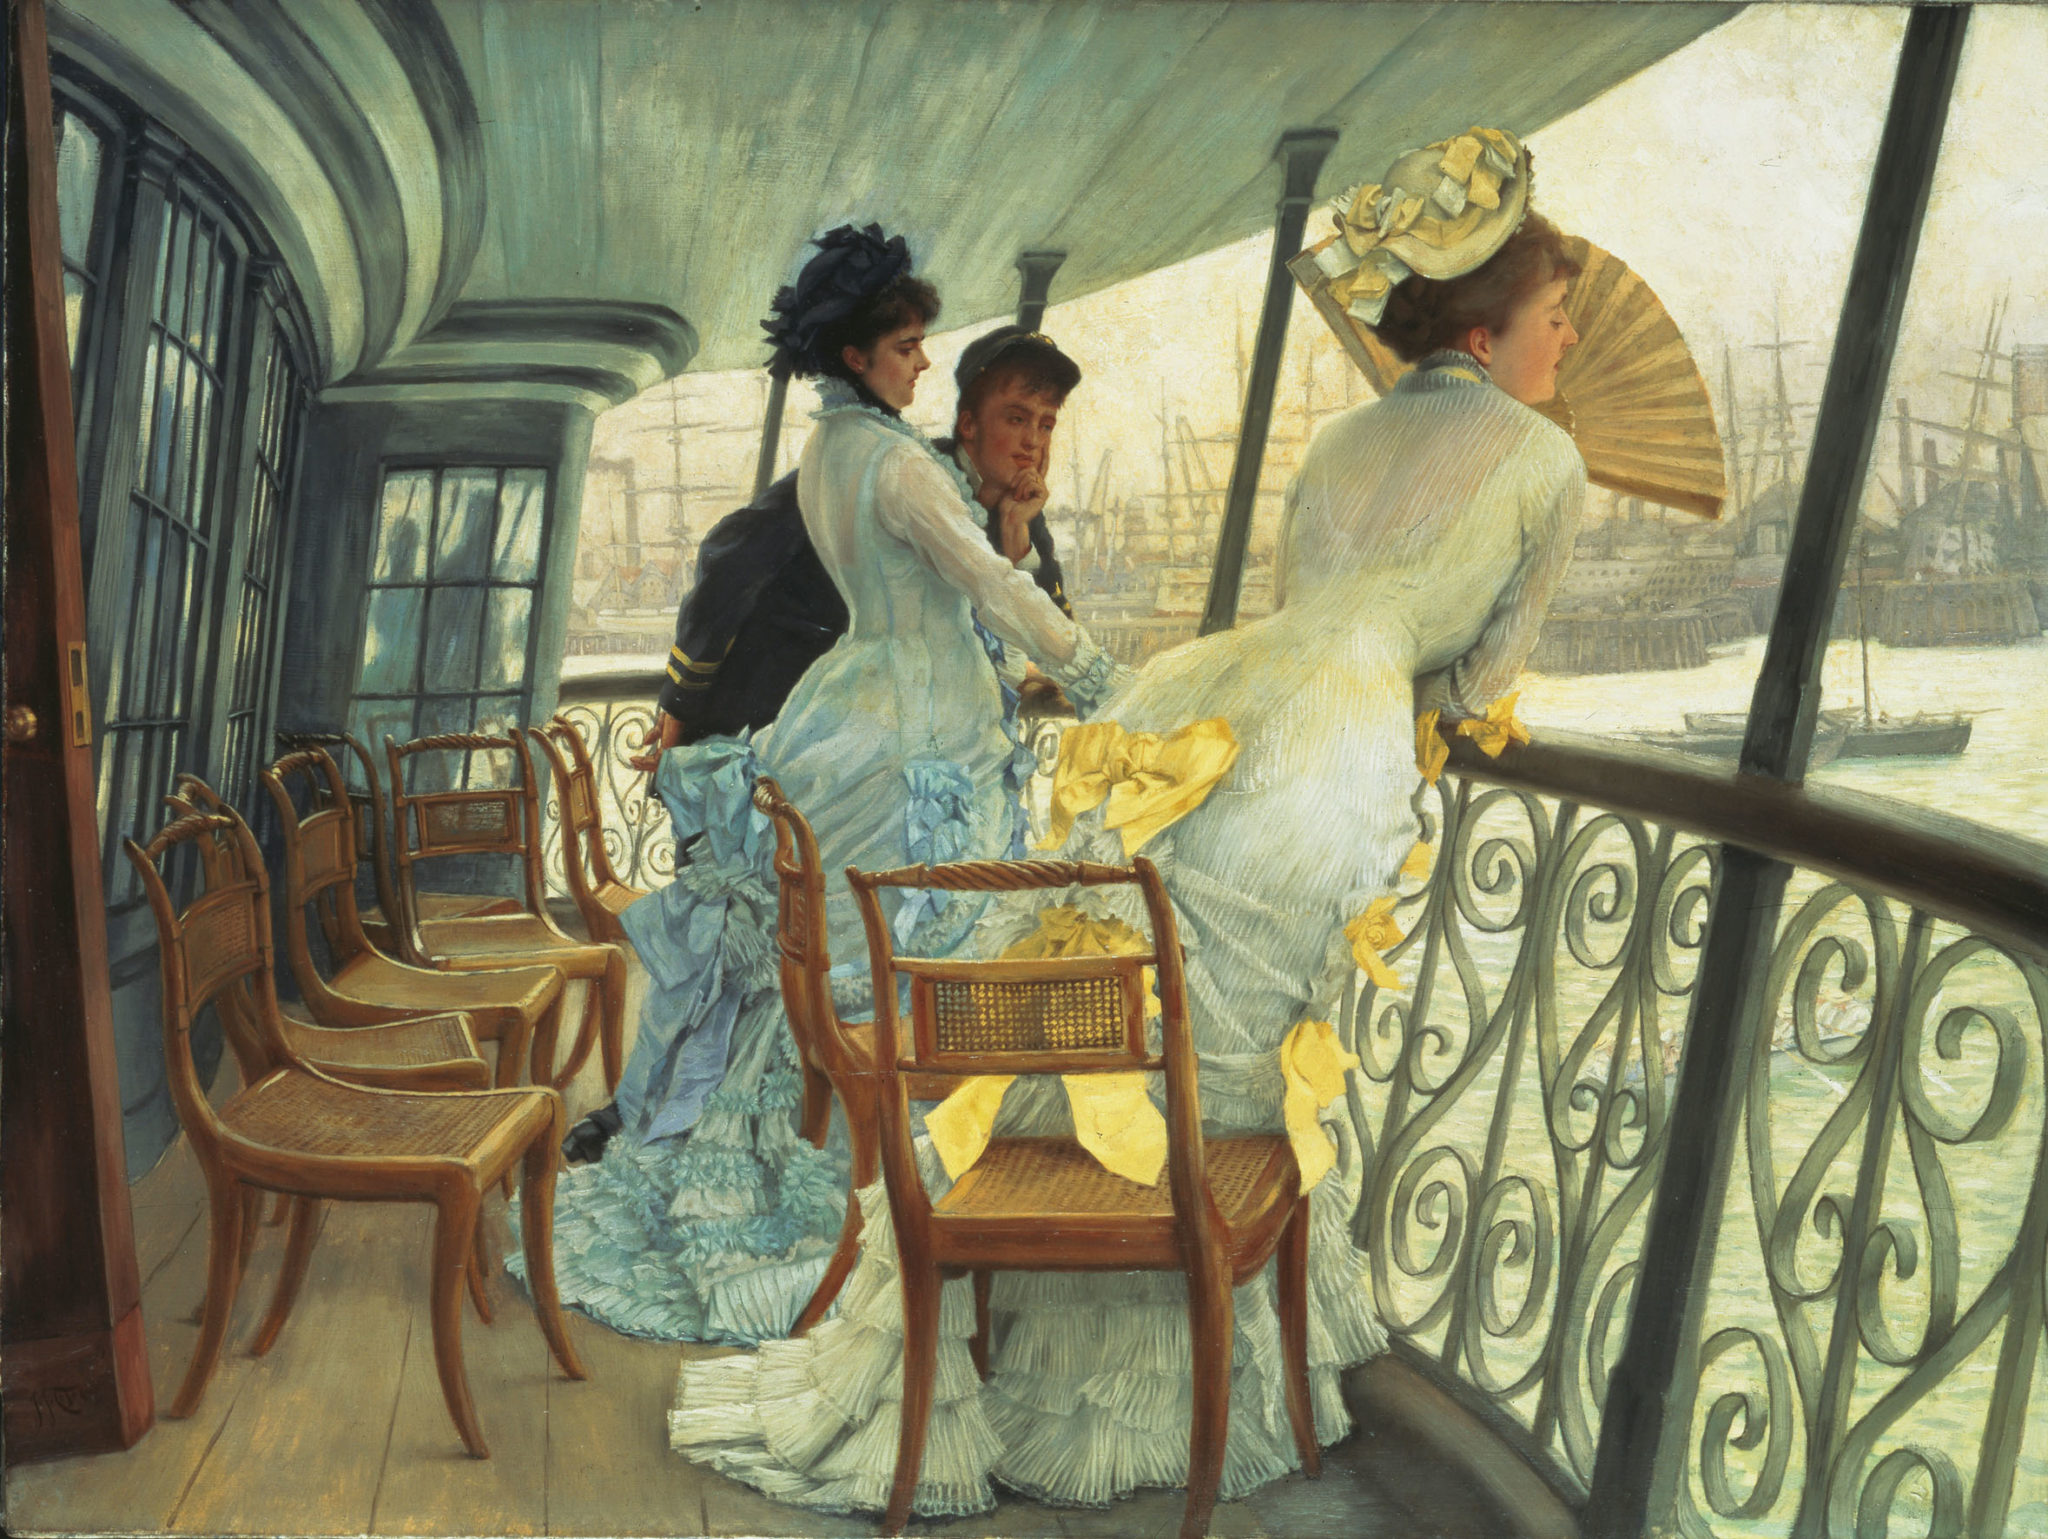 James Tissot, The Gallery of HSM Calcutta (Portsmouth), 1876 ca, Oil paint on canvas, UK, Londra, Tate - © Tate, London 2015